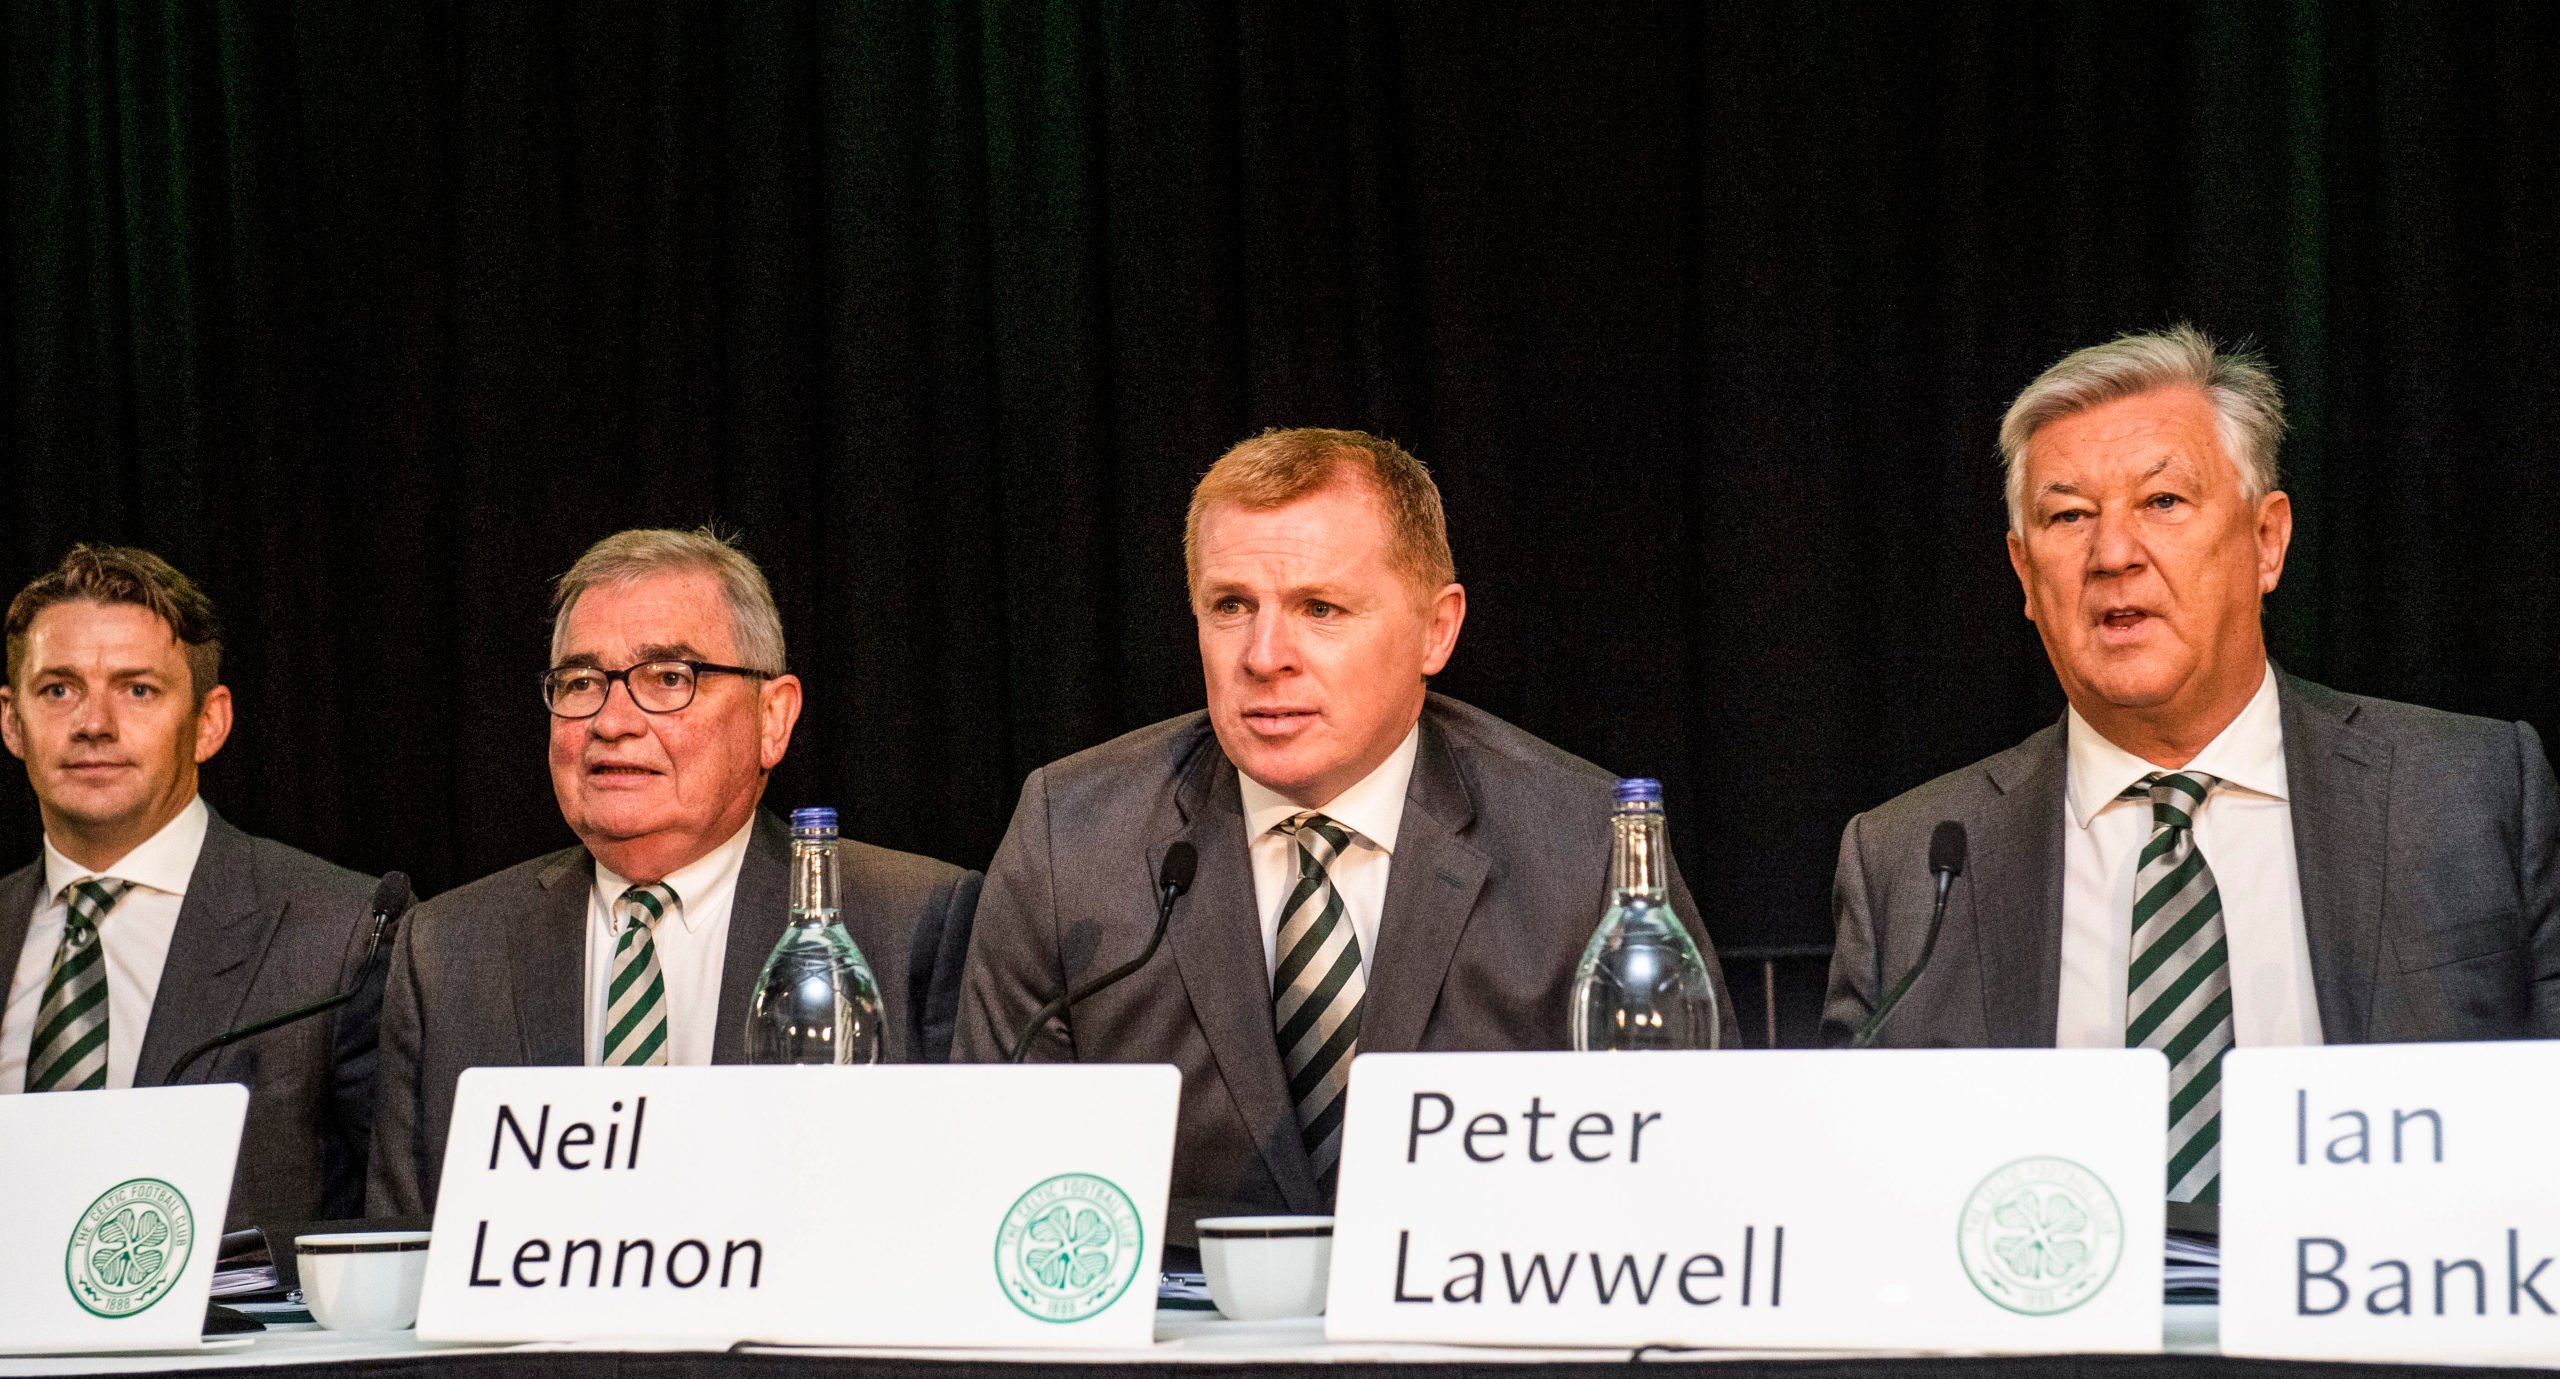 Report outlines financial effect of pandemic on Celtic revenue; Lawwell shown up